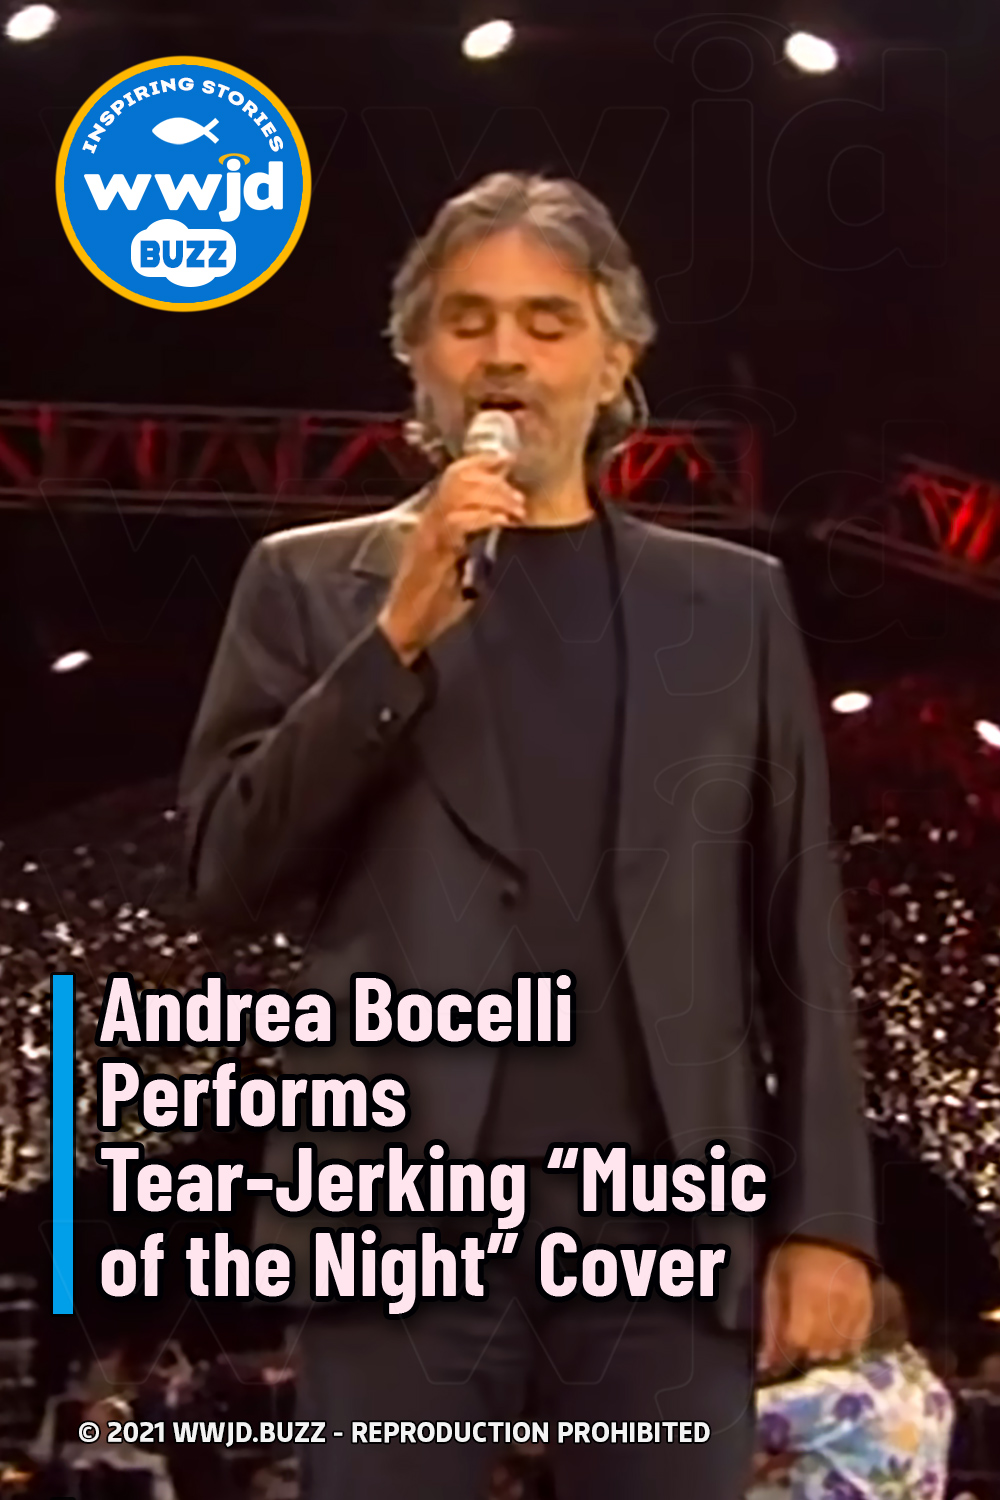 Andrea Bocelli Performs Tear-Jerking “Music of the Night” Cover